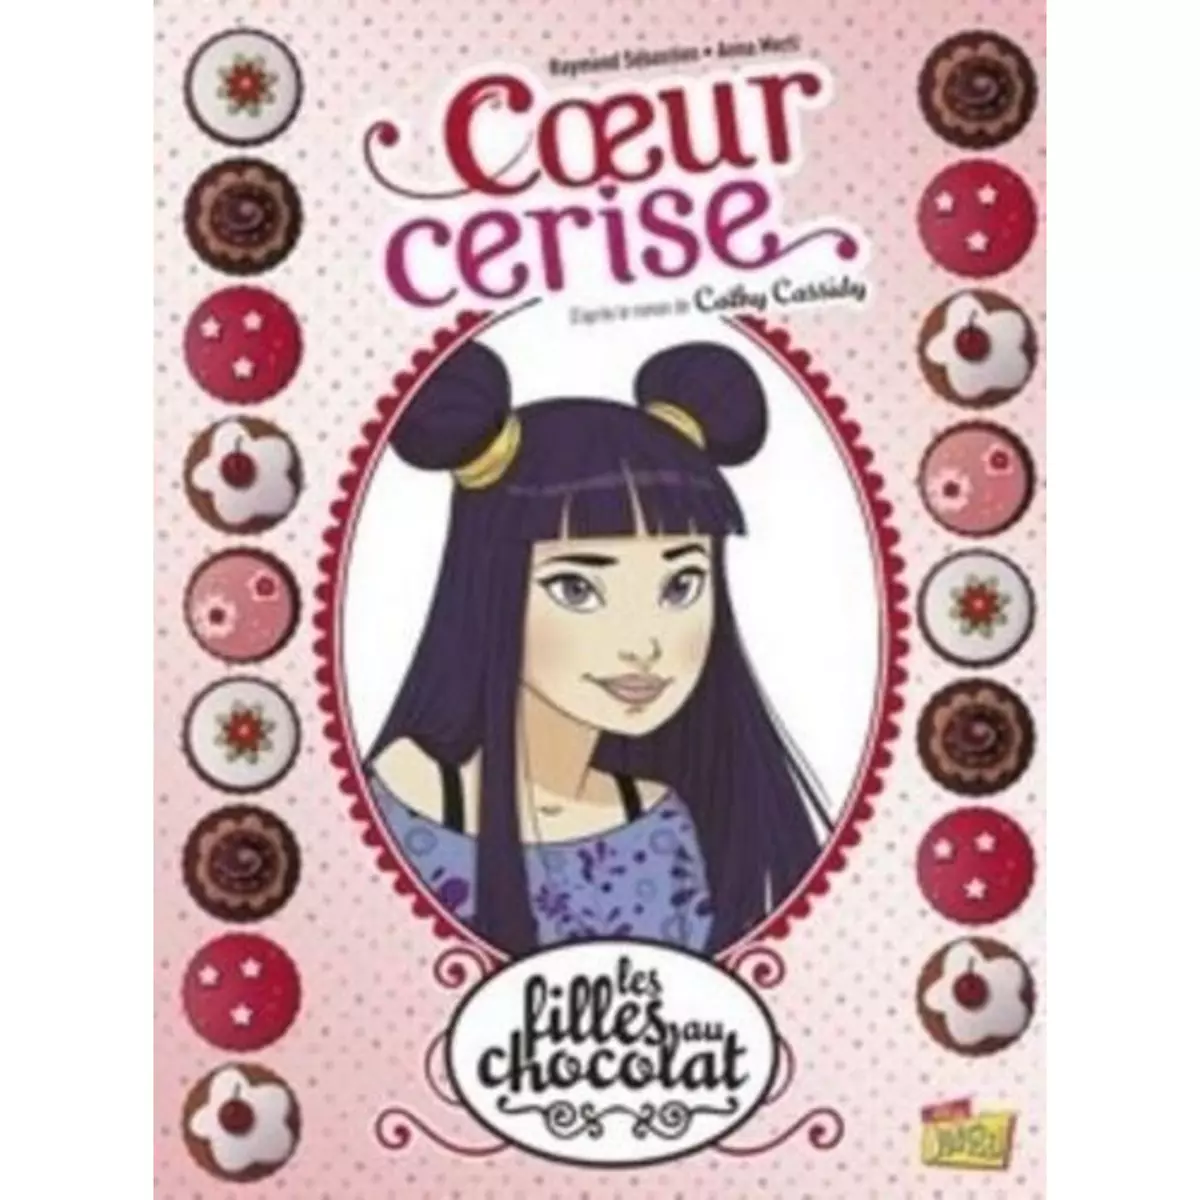  LES FILLES AU CHOCOLAT TOME 1 : COEUR CERISE. EDITION 20 ANS, EDITION COLLECTOR, Cassidy Cathy